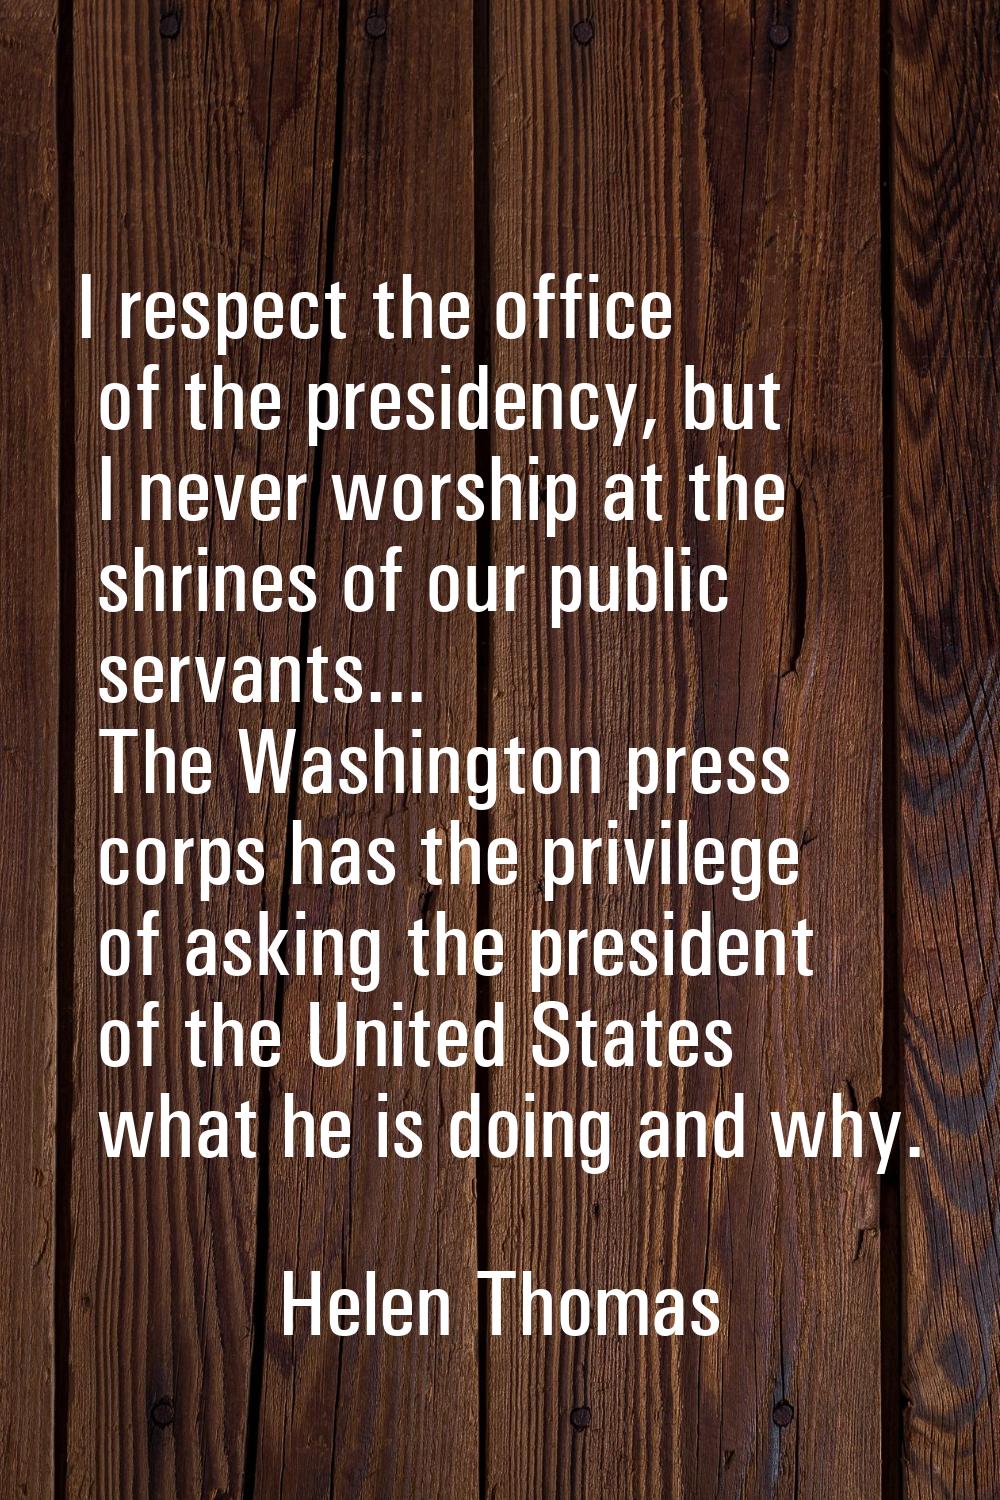 I respect the office of the presidency, but I never worship at the shrines of our public servants..